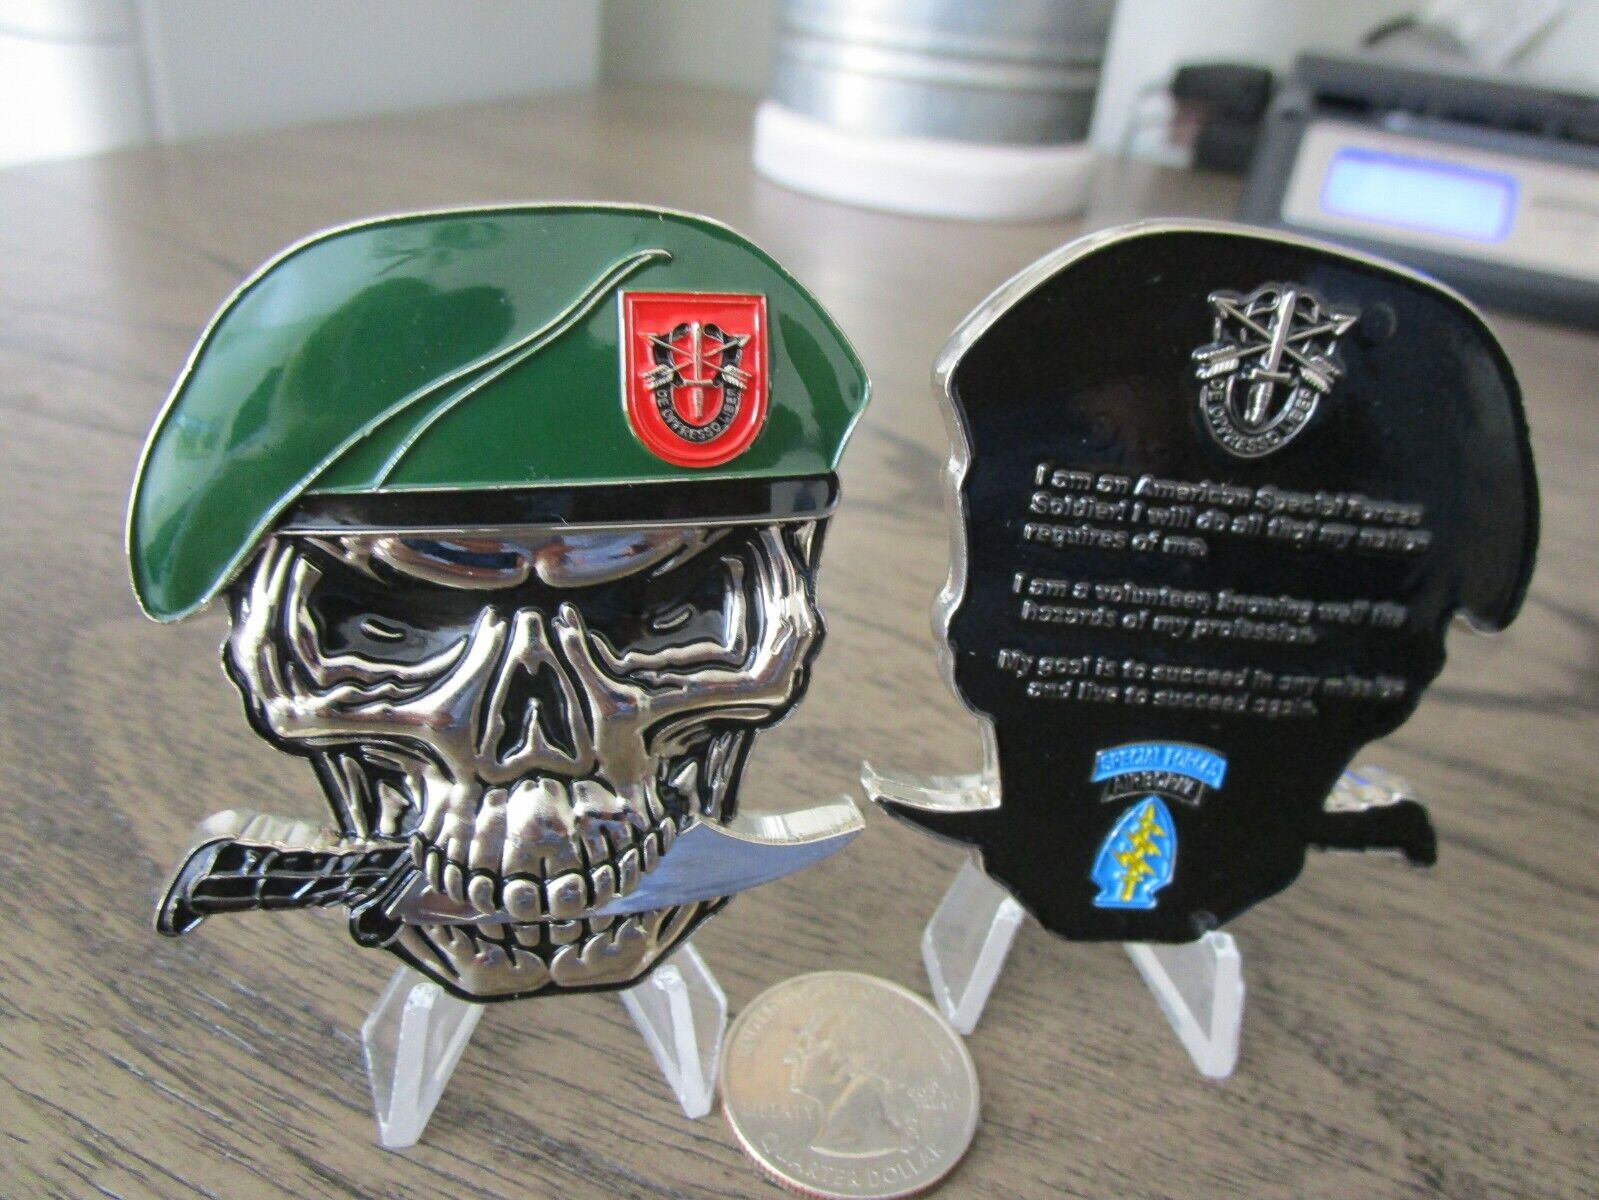 US Army Special Forces Group Creed Green Berets 7th SFG (A) Skull Challenge Coin